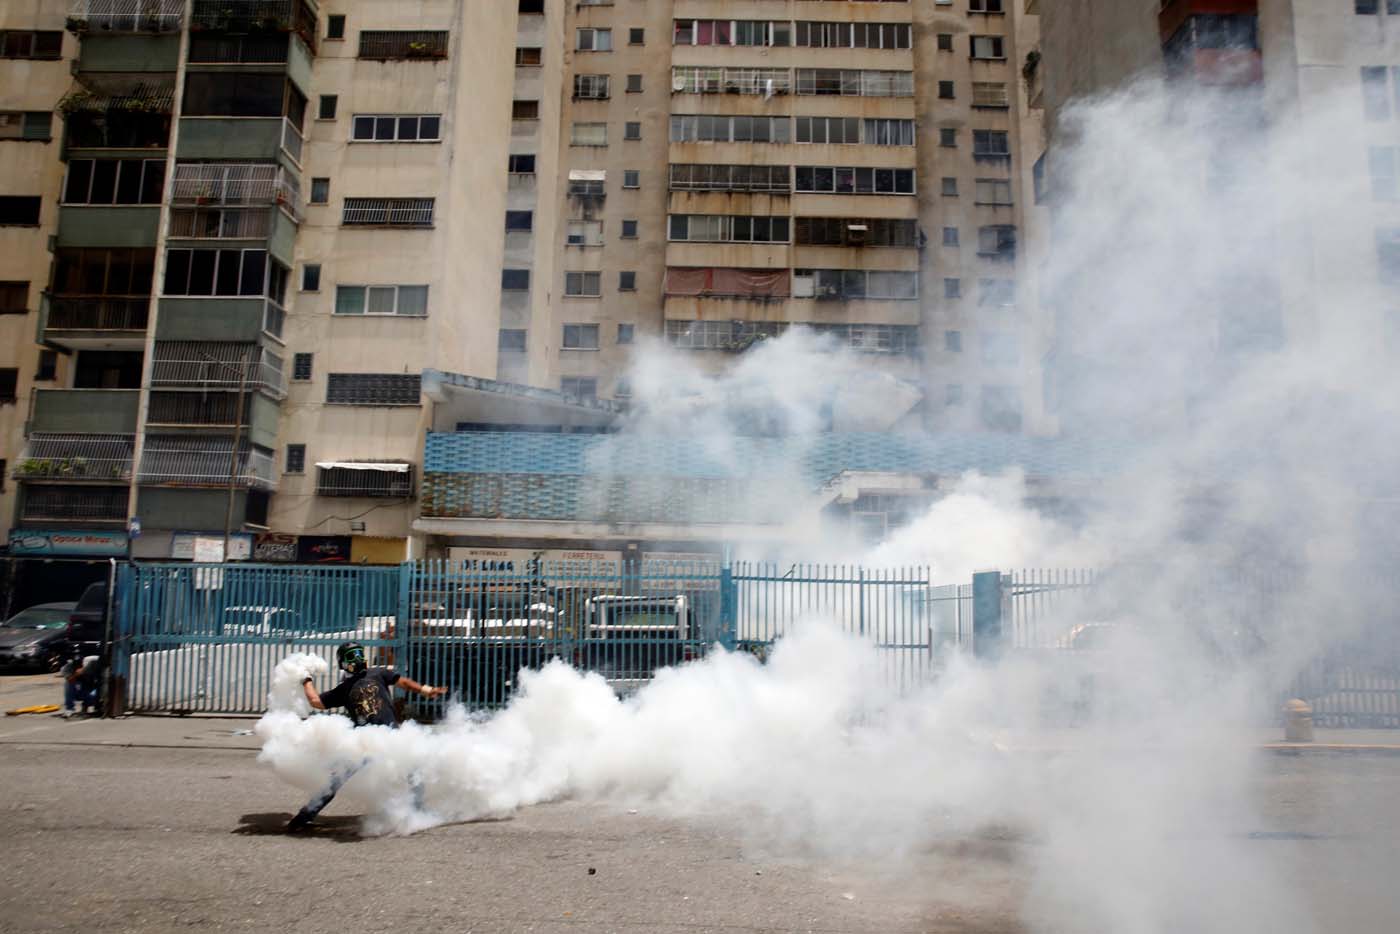 A demonstrator throws back a tear gas canister while clashing with riot security forces during a strike called to protest against Venezuelan President Nicolas Maduro's government in Caracas, Venezuela, July 20, 2017. REUTERS/Carlos Garcia Rawlins     TPX IMAGES OF THE DAY